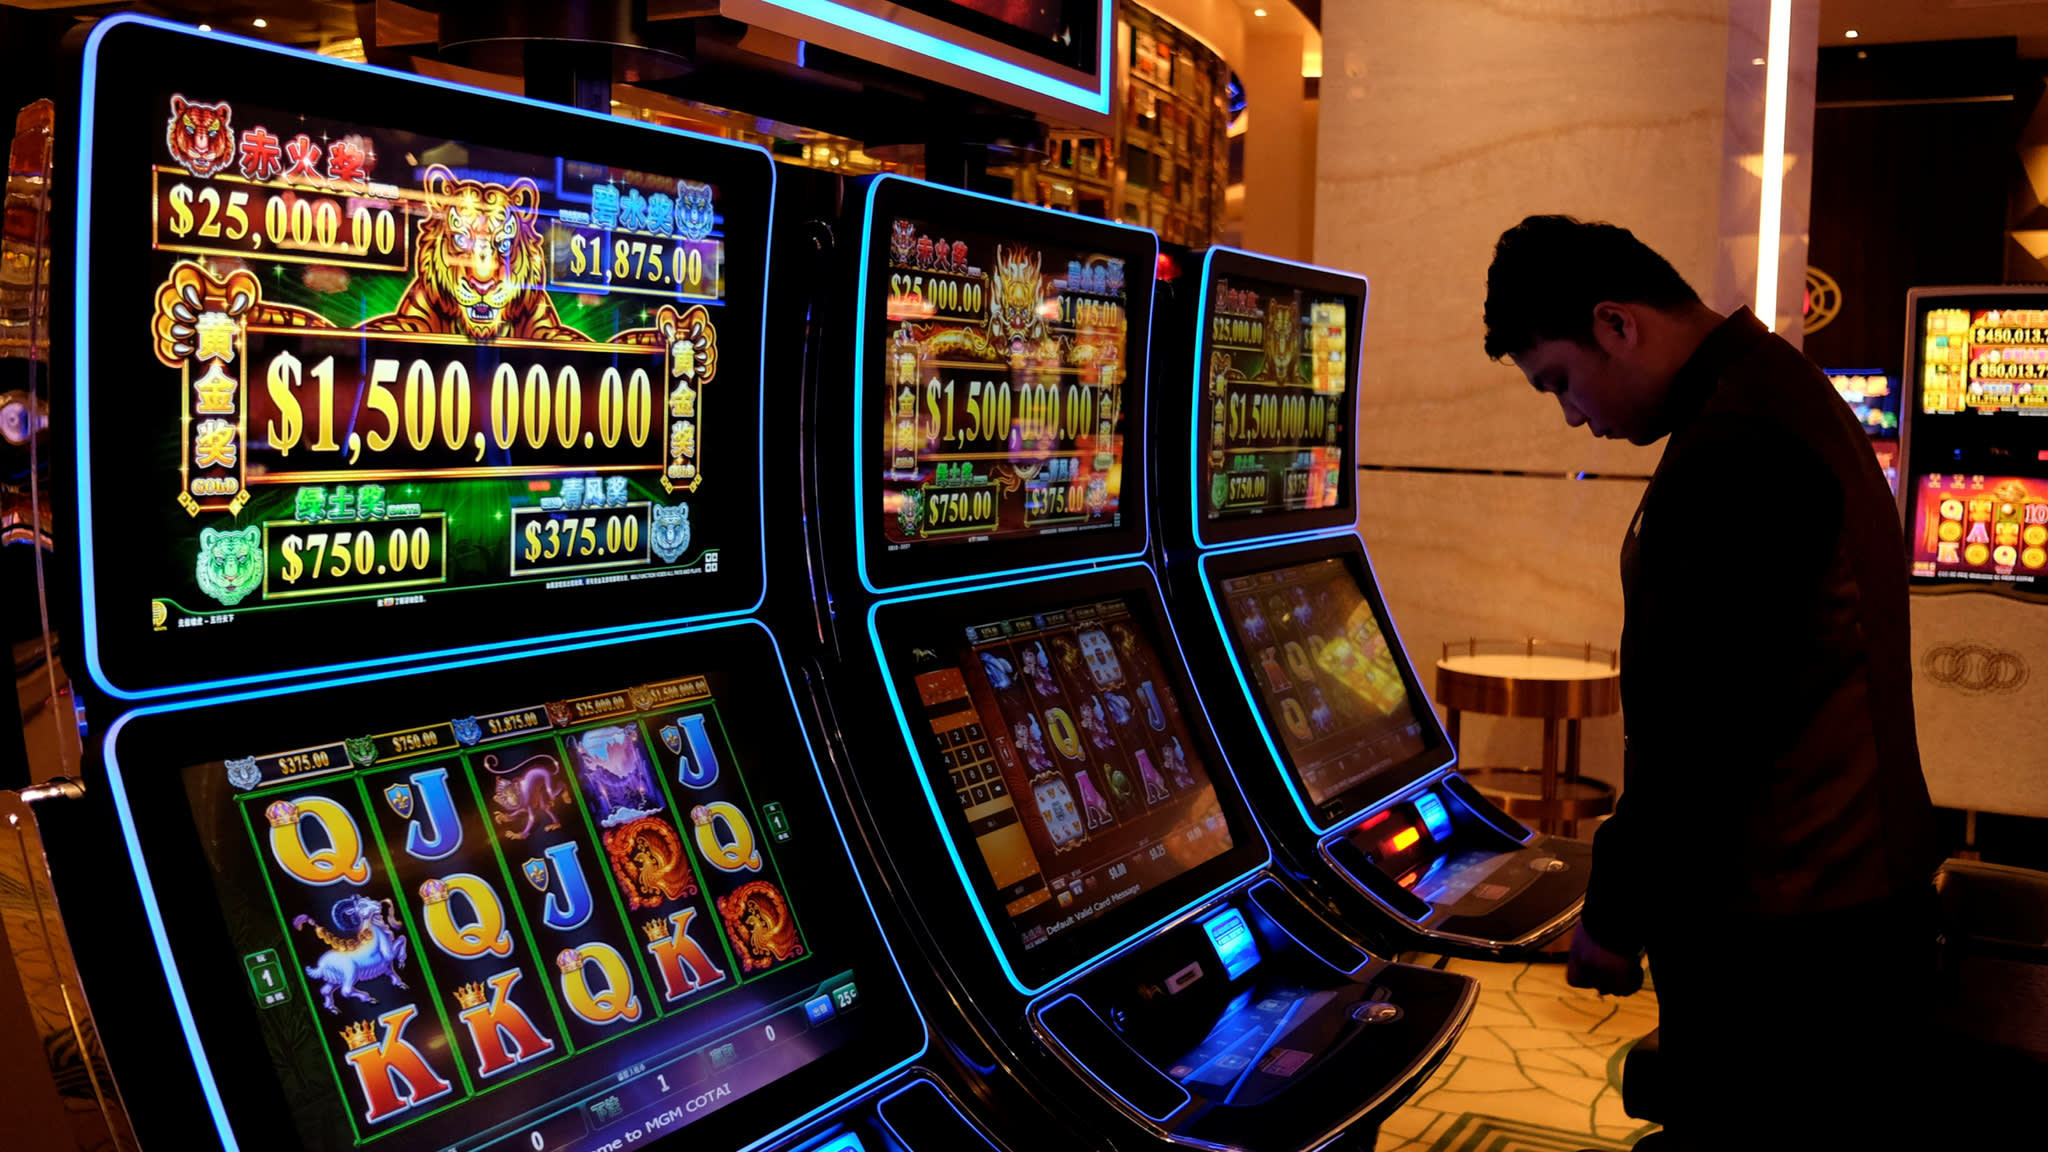 Texas May Consider Proposed Online Casino Legislation in January